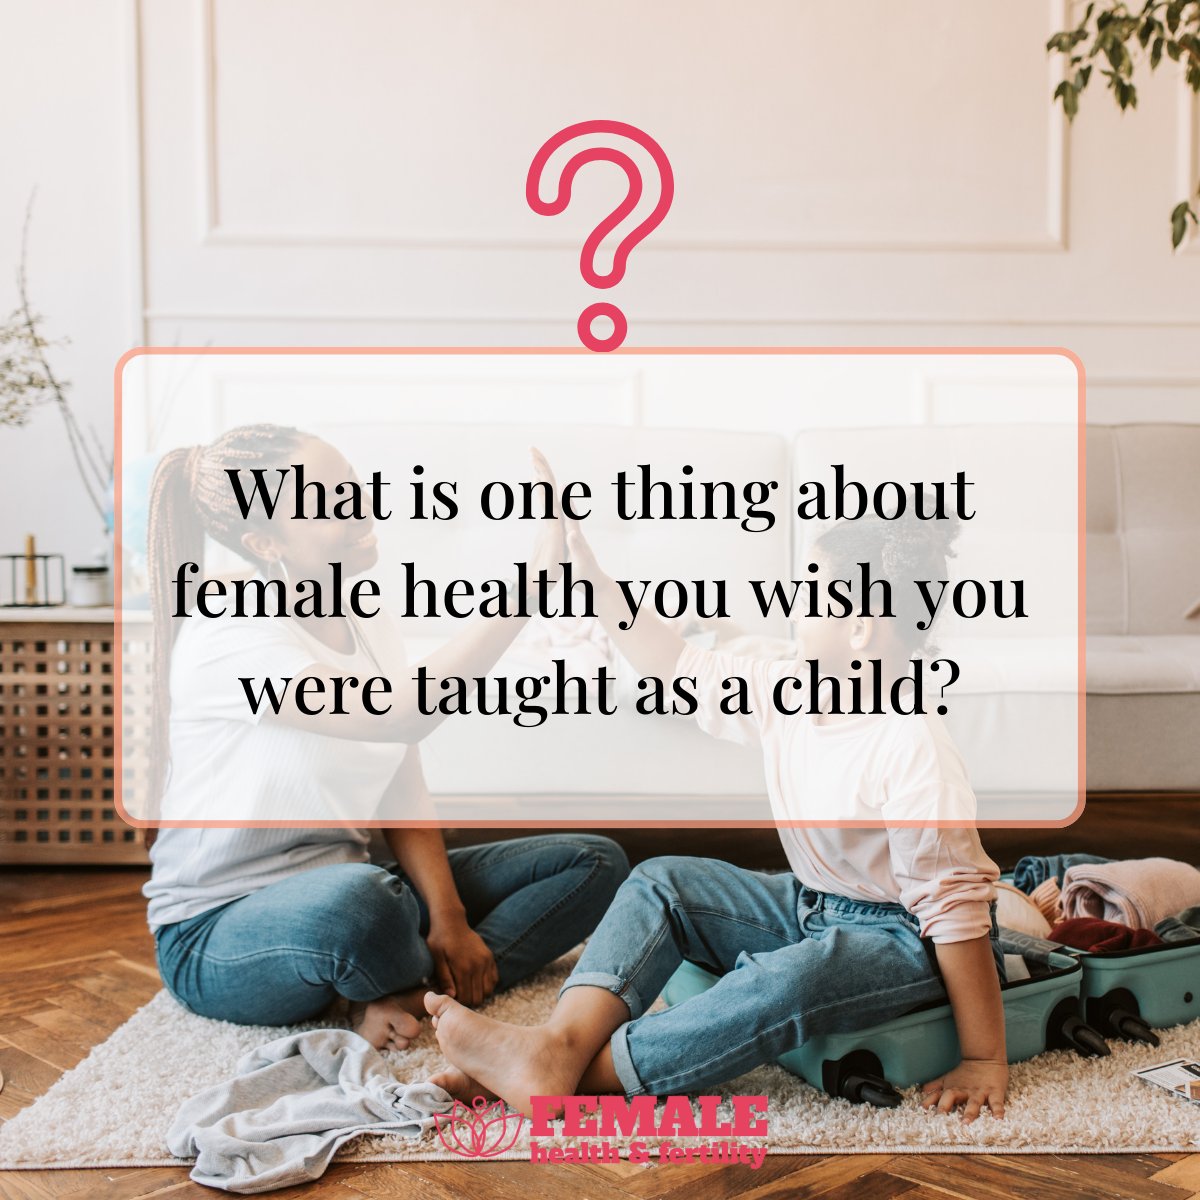 Some facts and facets of 'womanhood' came to us as a surprise, even as women. What is one thing about female health you wish you were taught as a child or wish you had known earlier?

#femalehealth #women #sisterhood